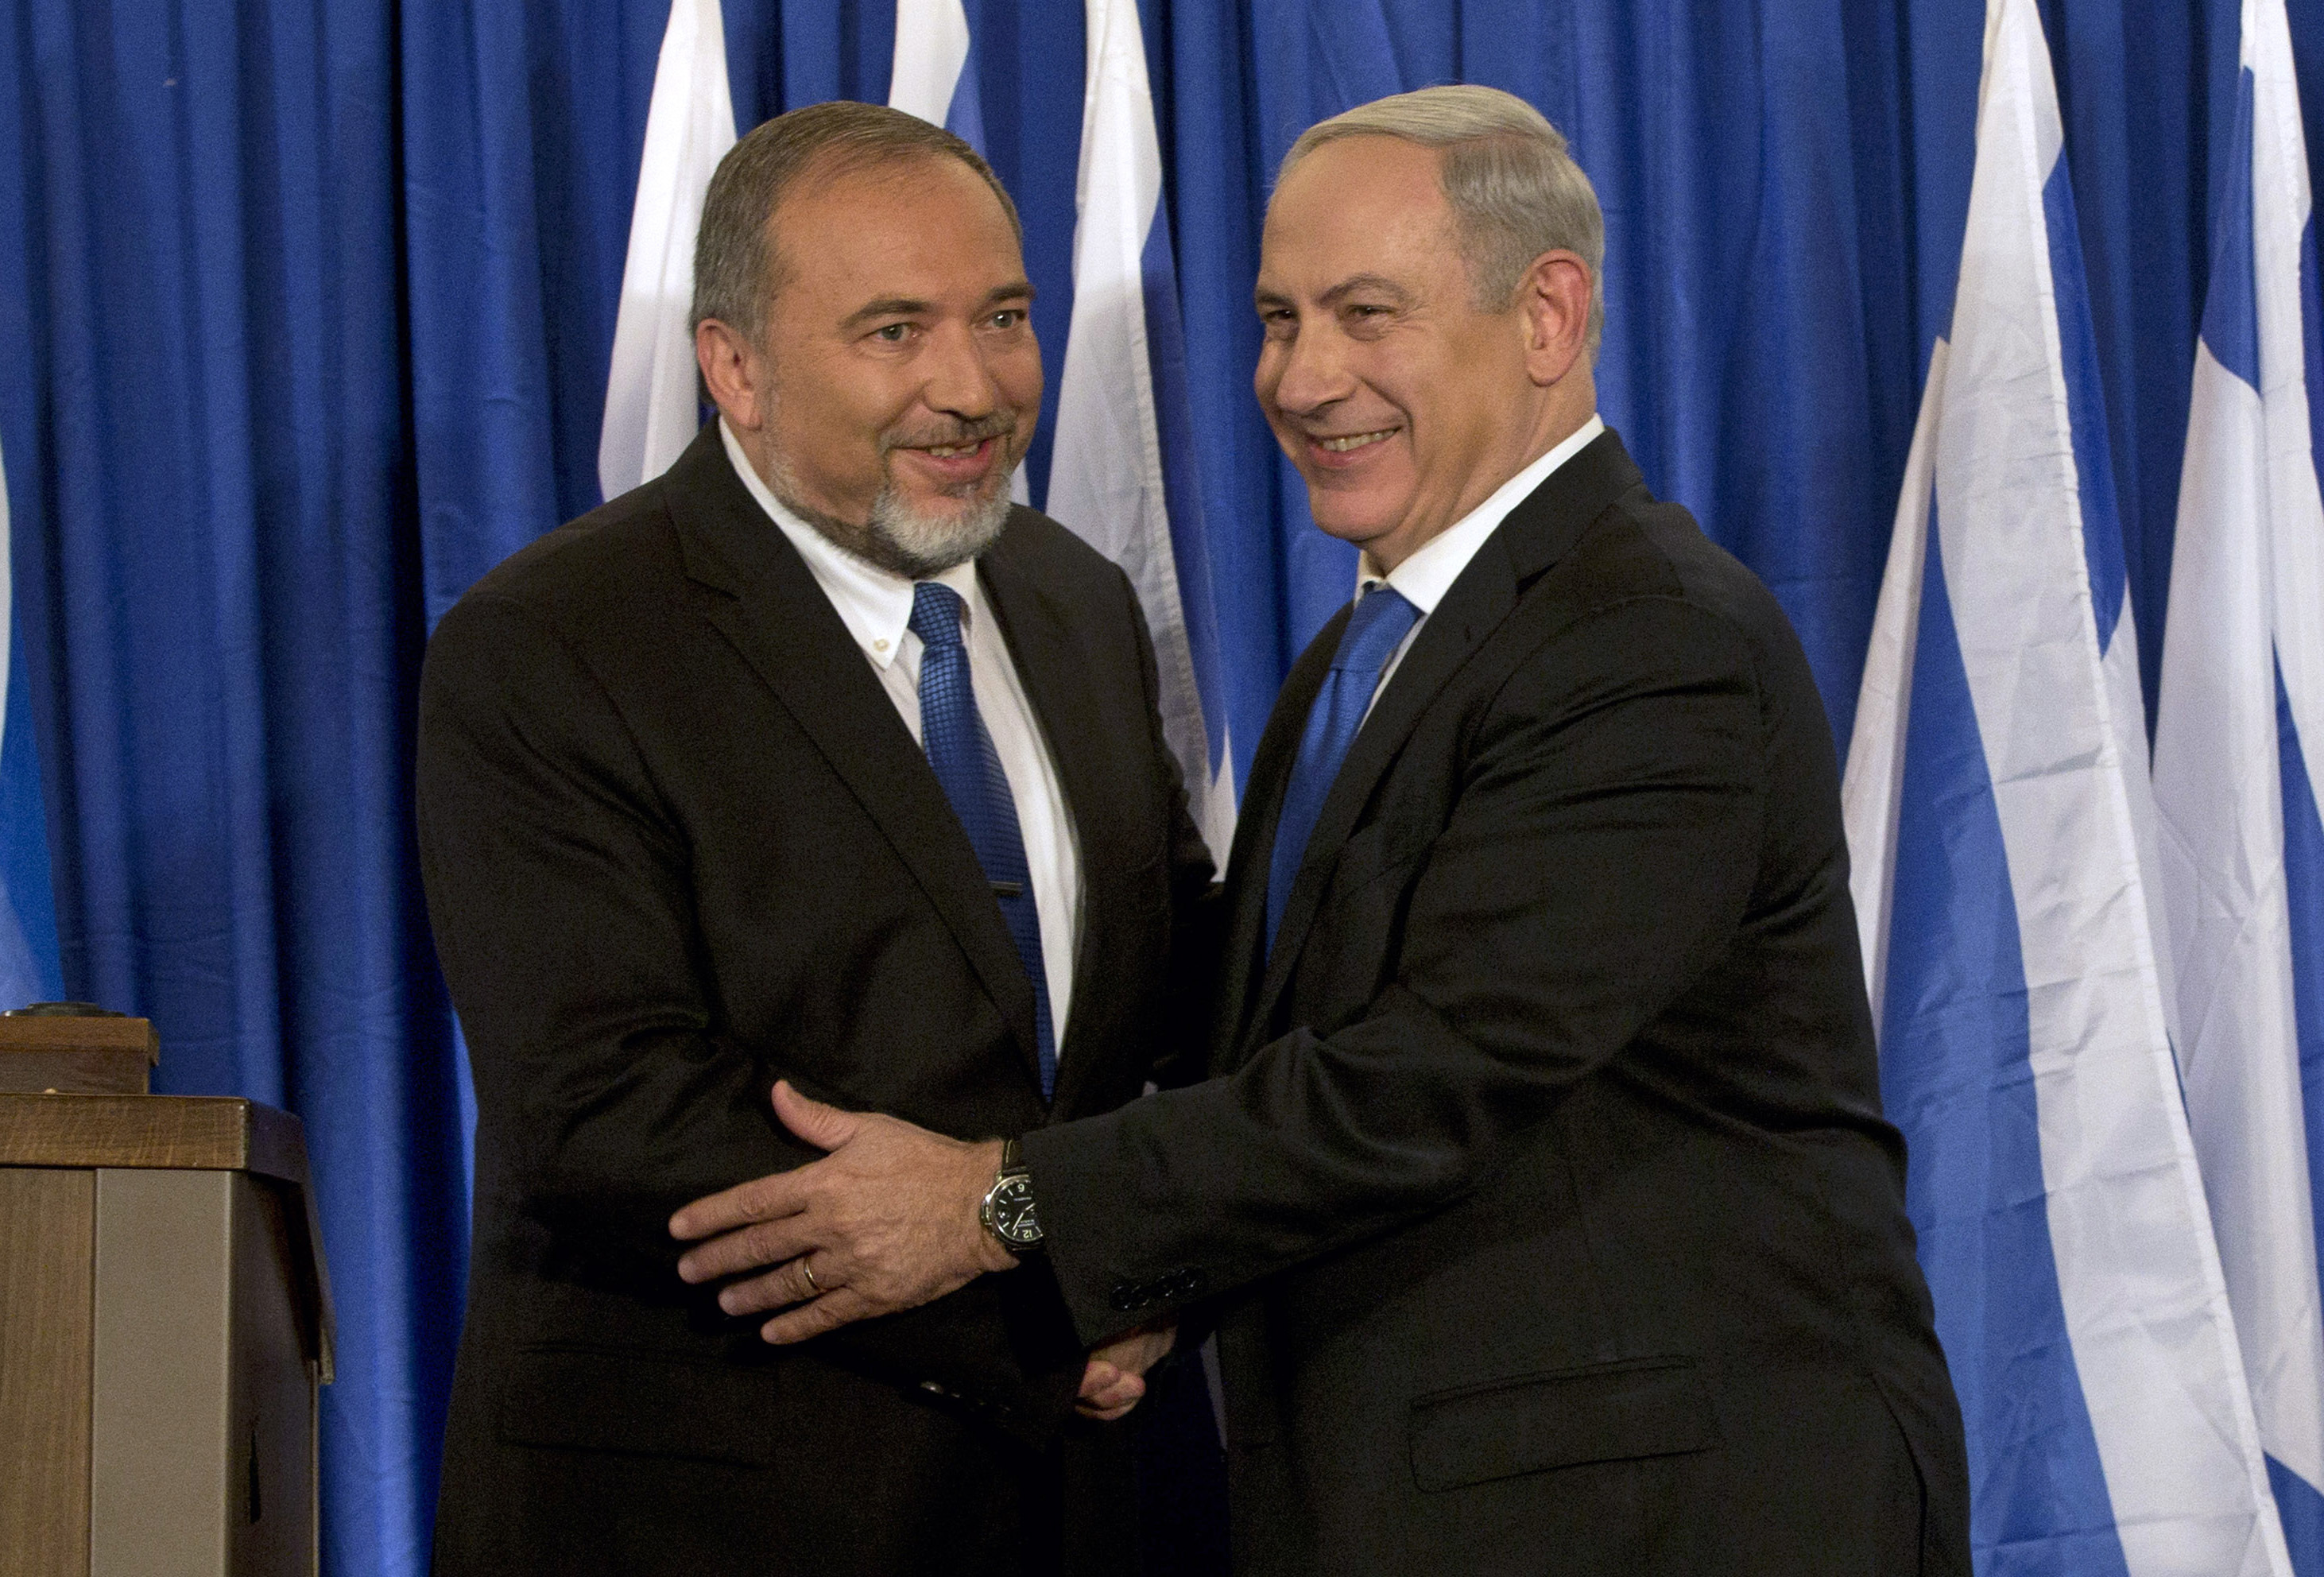 FILE - In this Oct. 25, 2012 file photo, Israeli Prime Minister Benjamin Netanyahu, right, and former Israeli Defense Minister Avigdor Lieberman shake hands in front of the media after giving a statement in Jerusalem. (AP Photo/Bernat Armangue, File)